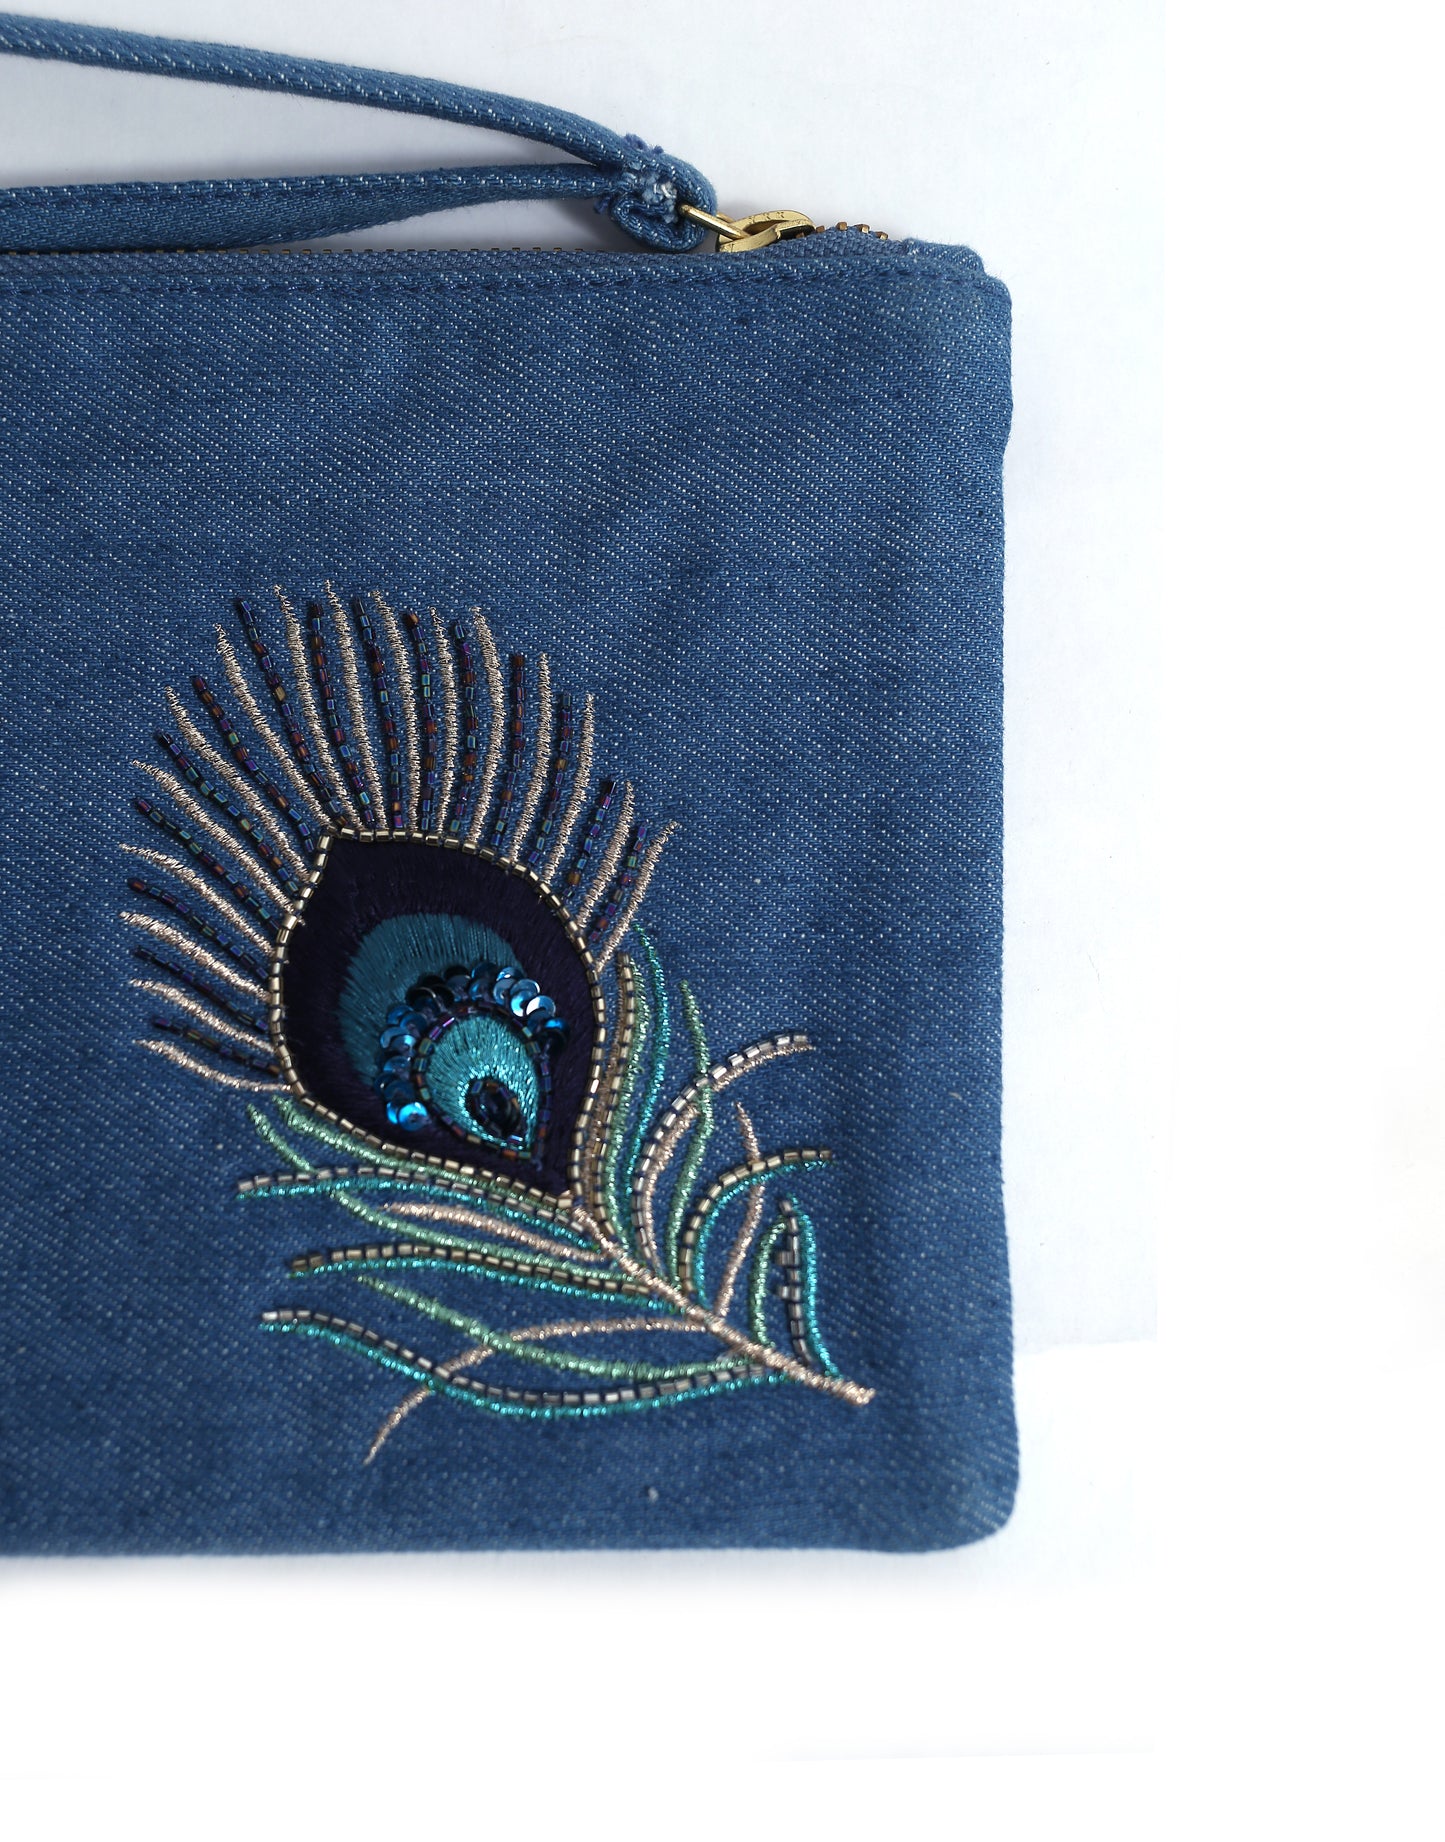 Peacock Feather Pouch